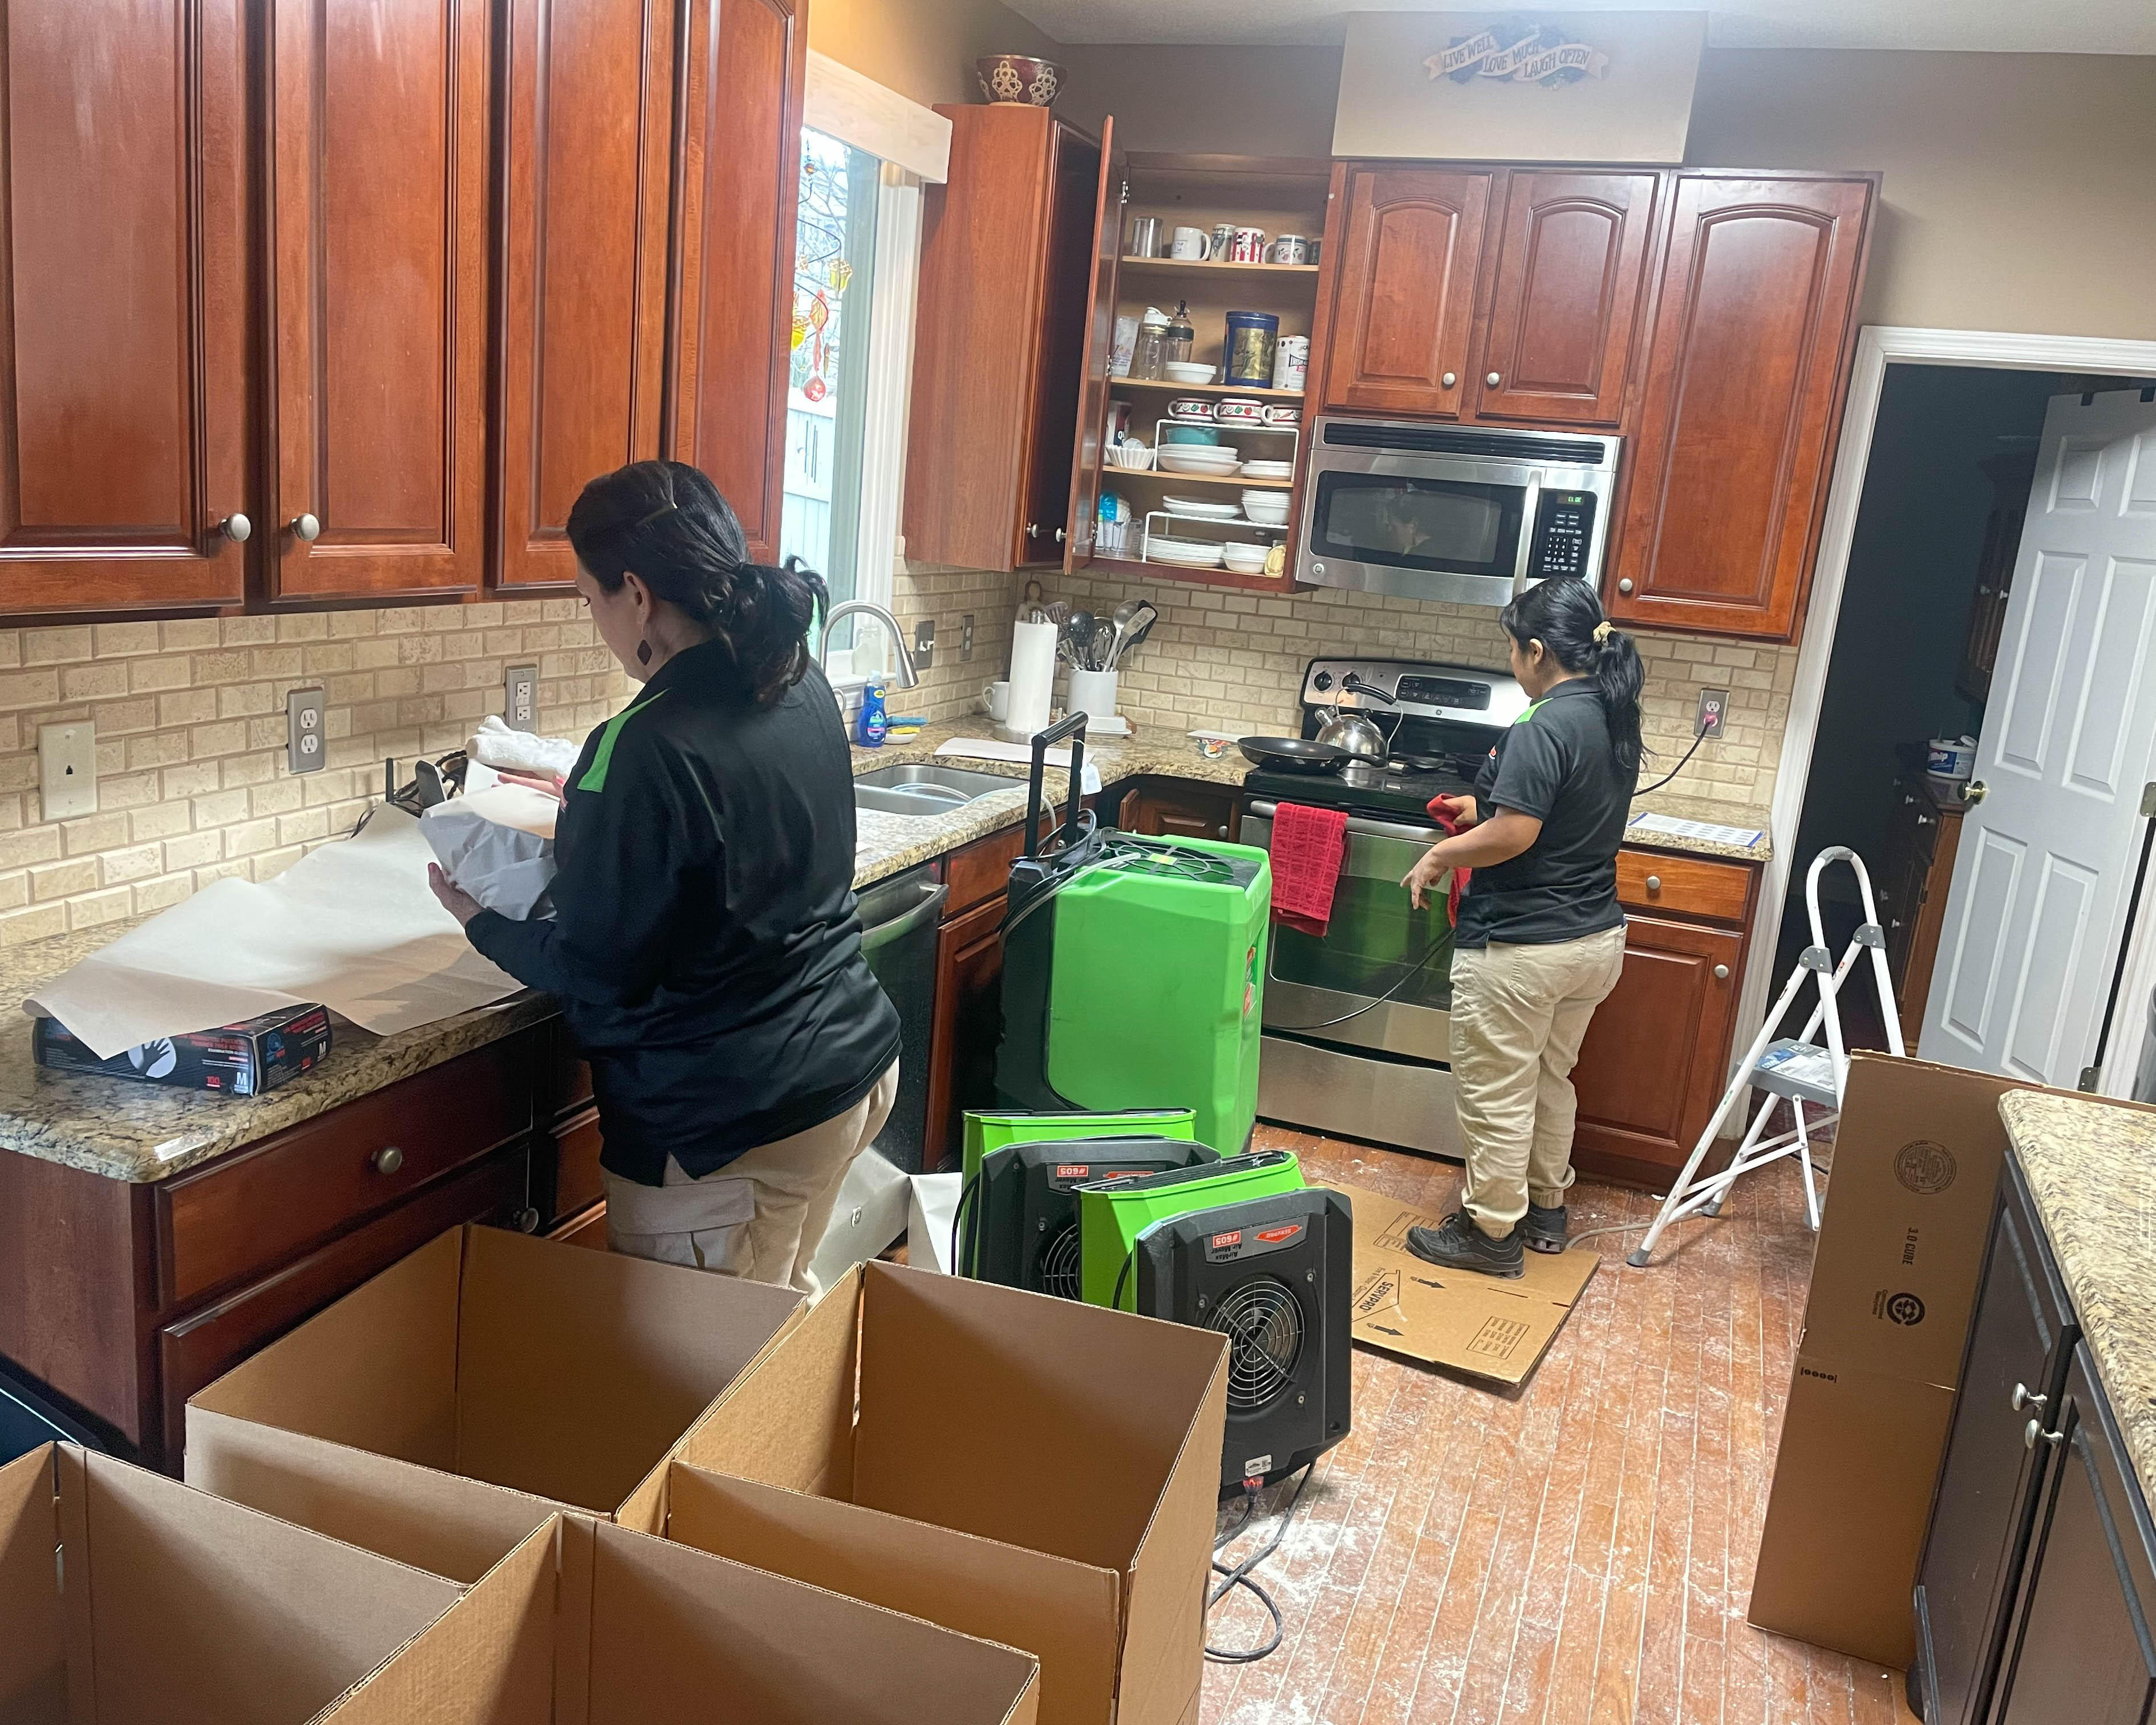 Due to the amount of moisture in this kitchen area, our staff need it to remove everything in order to start the drying process.